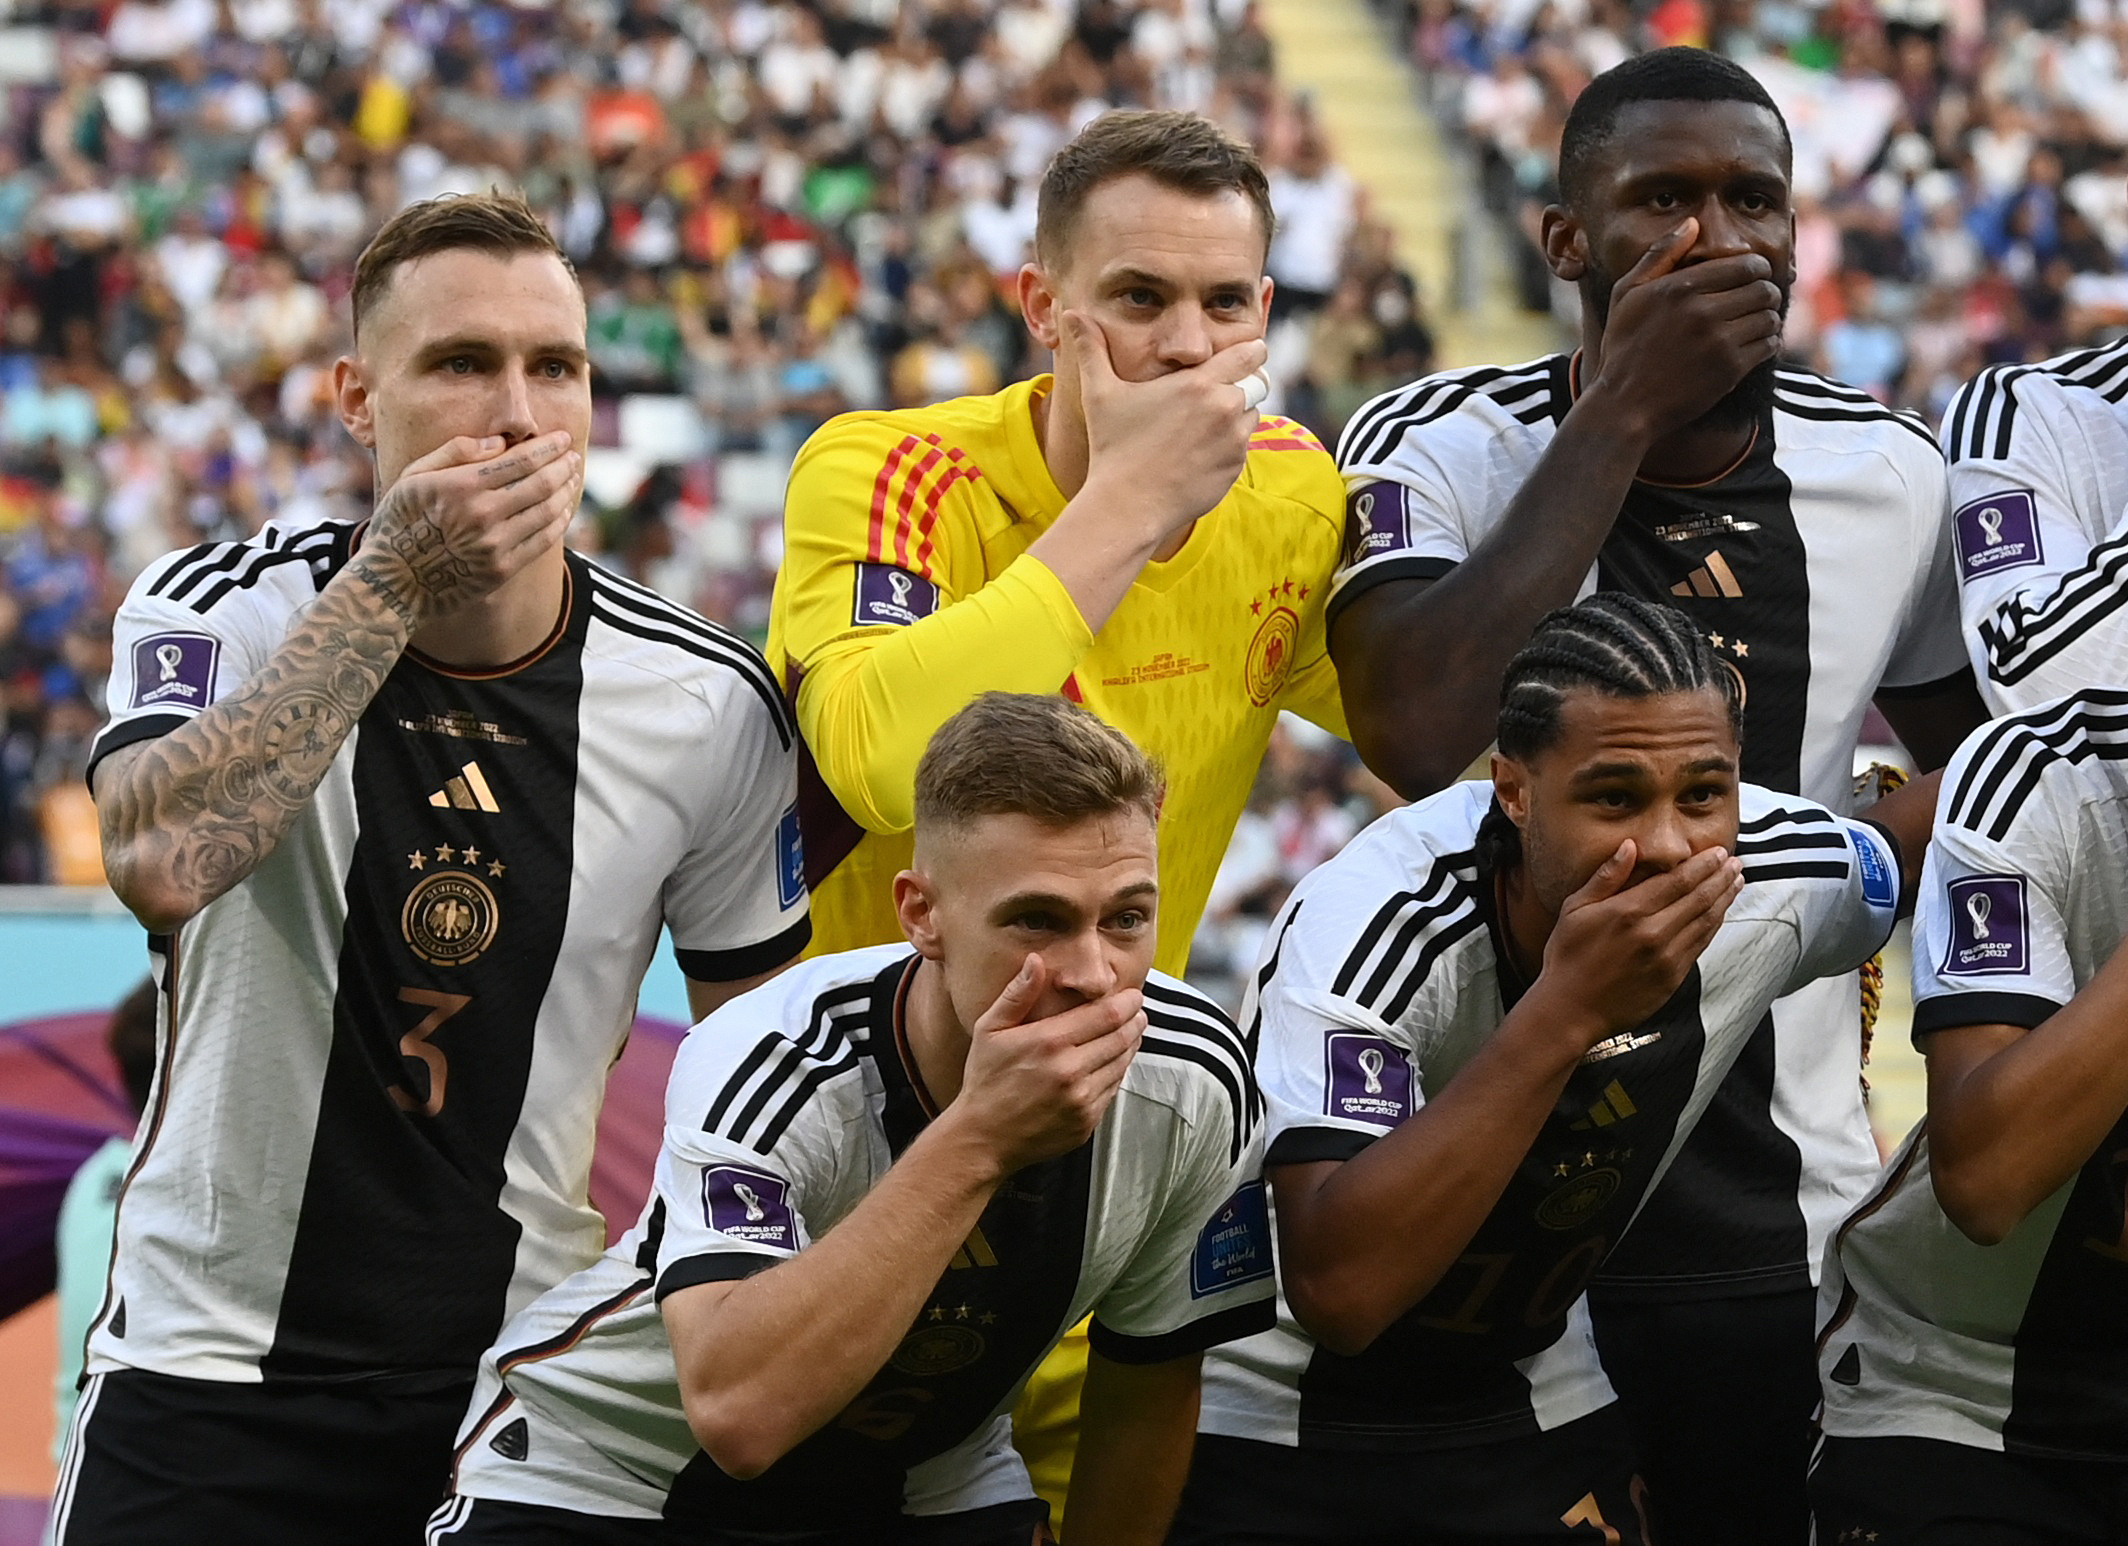 Soccer Football - FIFA World Cup Qatar 2022 - Group E - Germany v Japan - Khalifa International Stadium, Doha, Qatar - November 23, 2022 Germany players cover their mouths as they pose for a team group photo before the match 